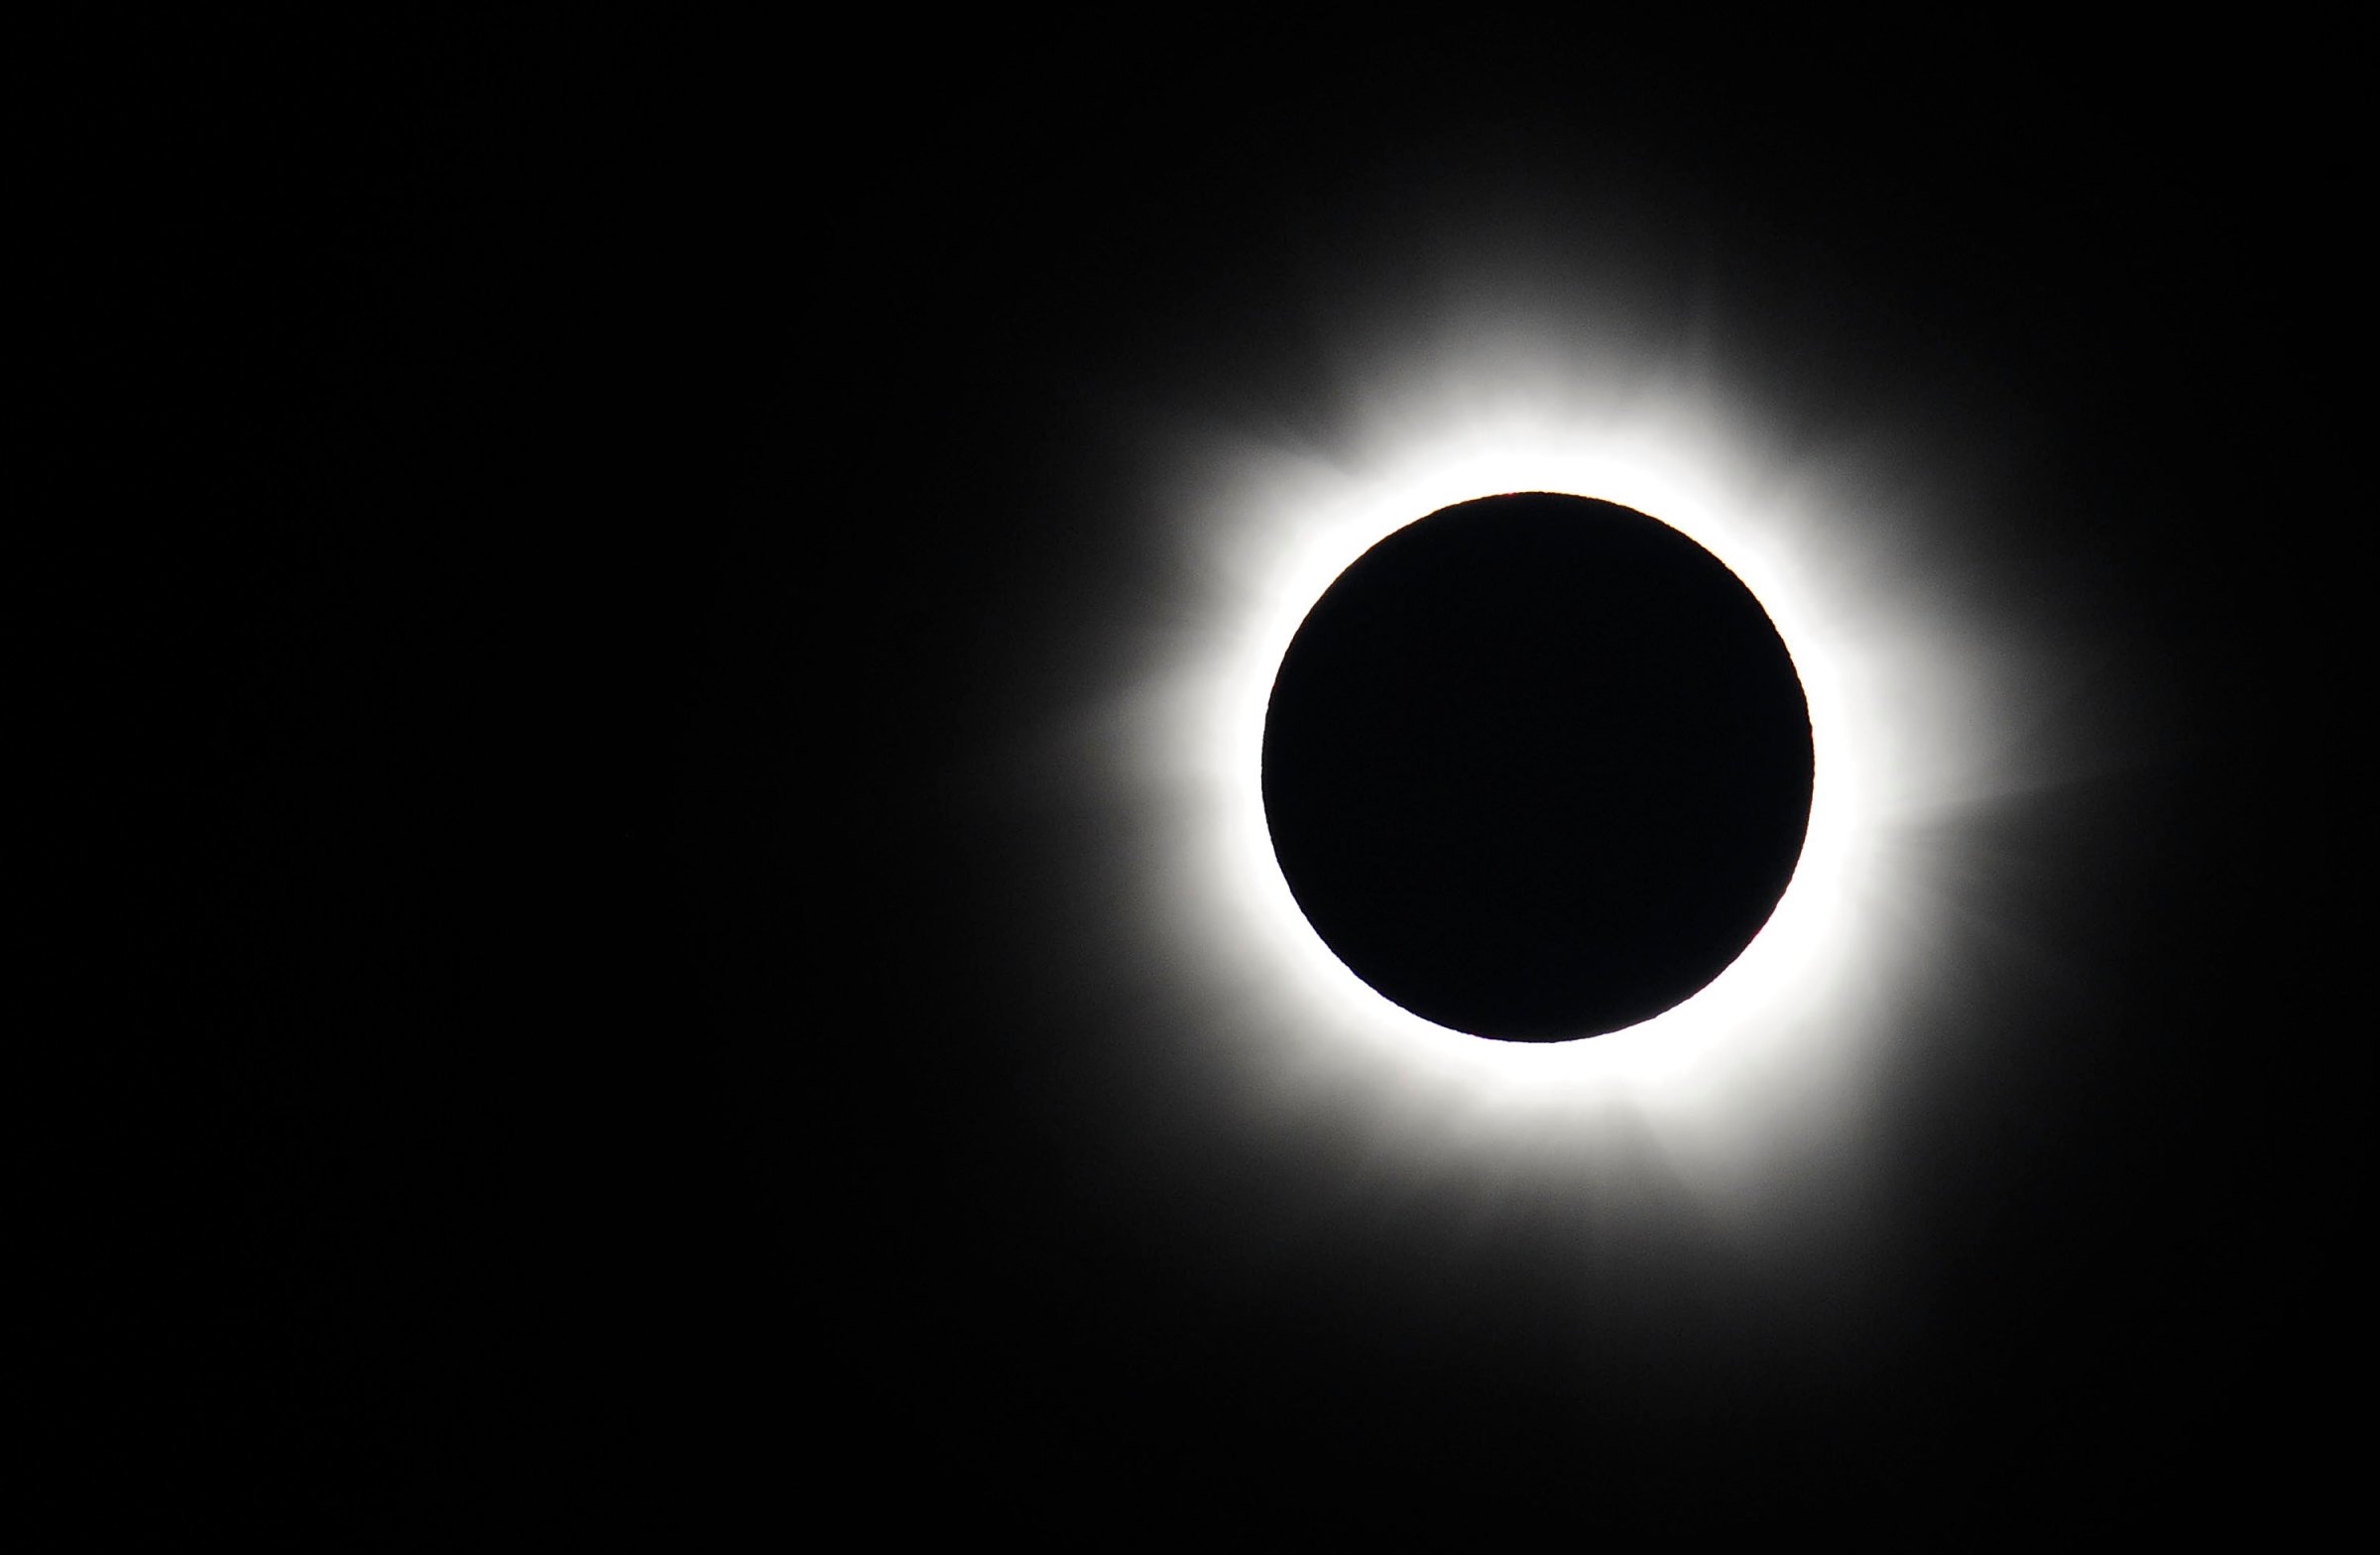 Totality is seen during the solar eclipse on Nov. 14, 2012 in Palm Cove, Australia.